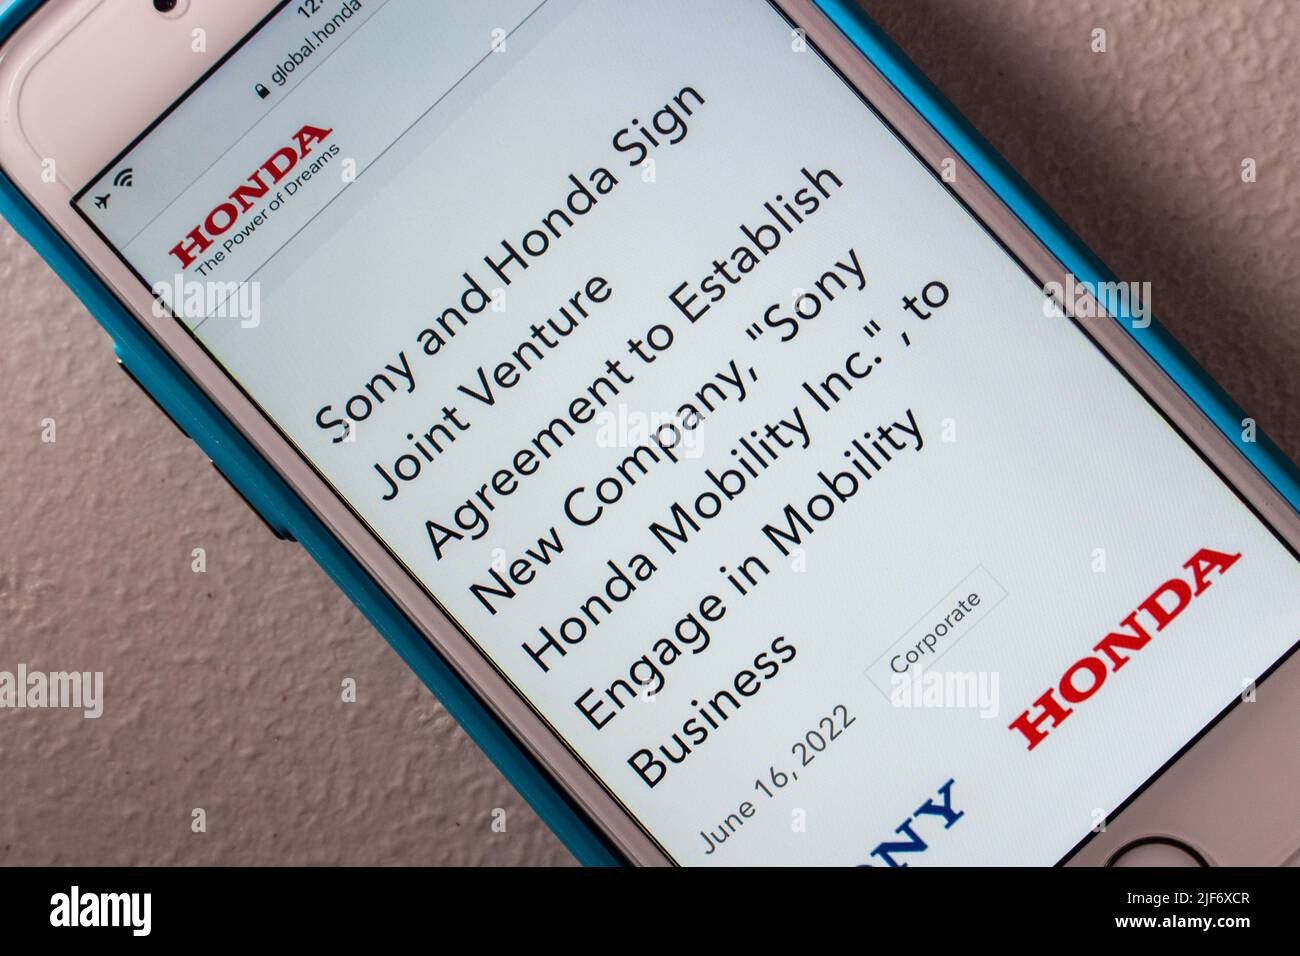 Announcement of Sony & Honda formed new company “Sony Honda Mobility Inc.” with plans to start EV and mobility services, from Honda’s release page Stock Photo